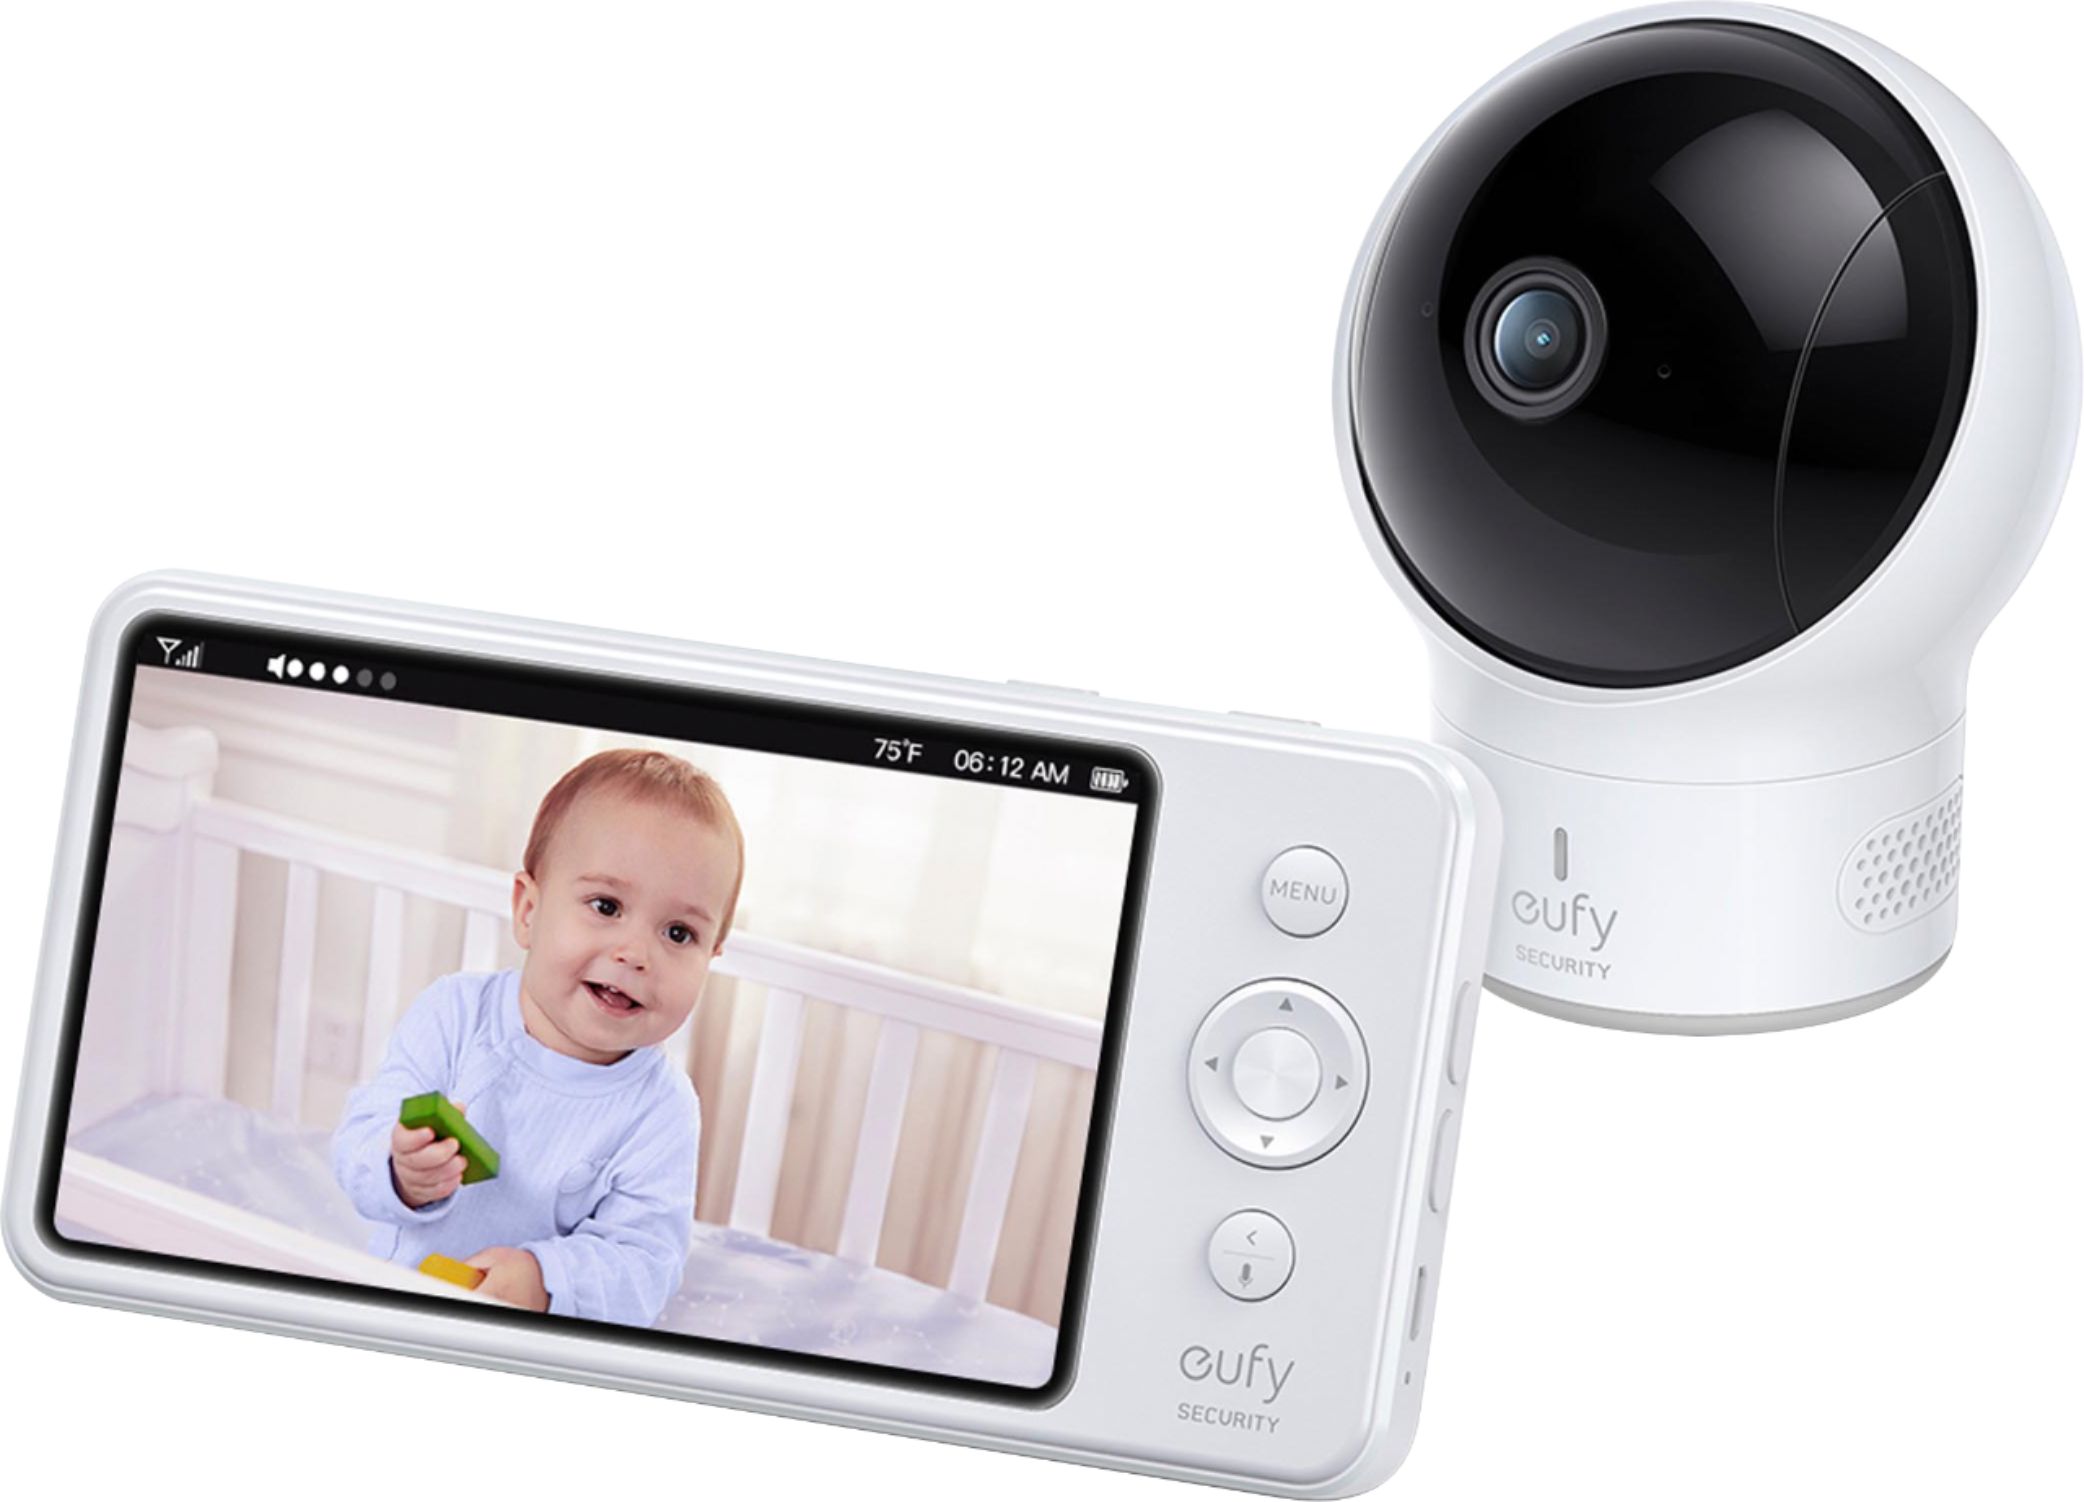 ret gave garage eufy Security Spaceview Baby Monitor Cam Bundle White E83121D1 - Best Buy